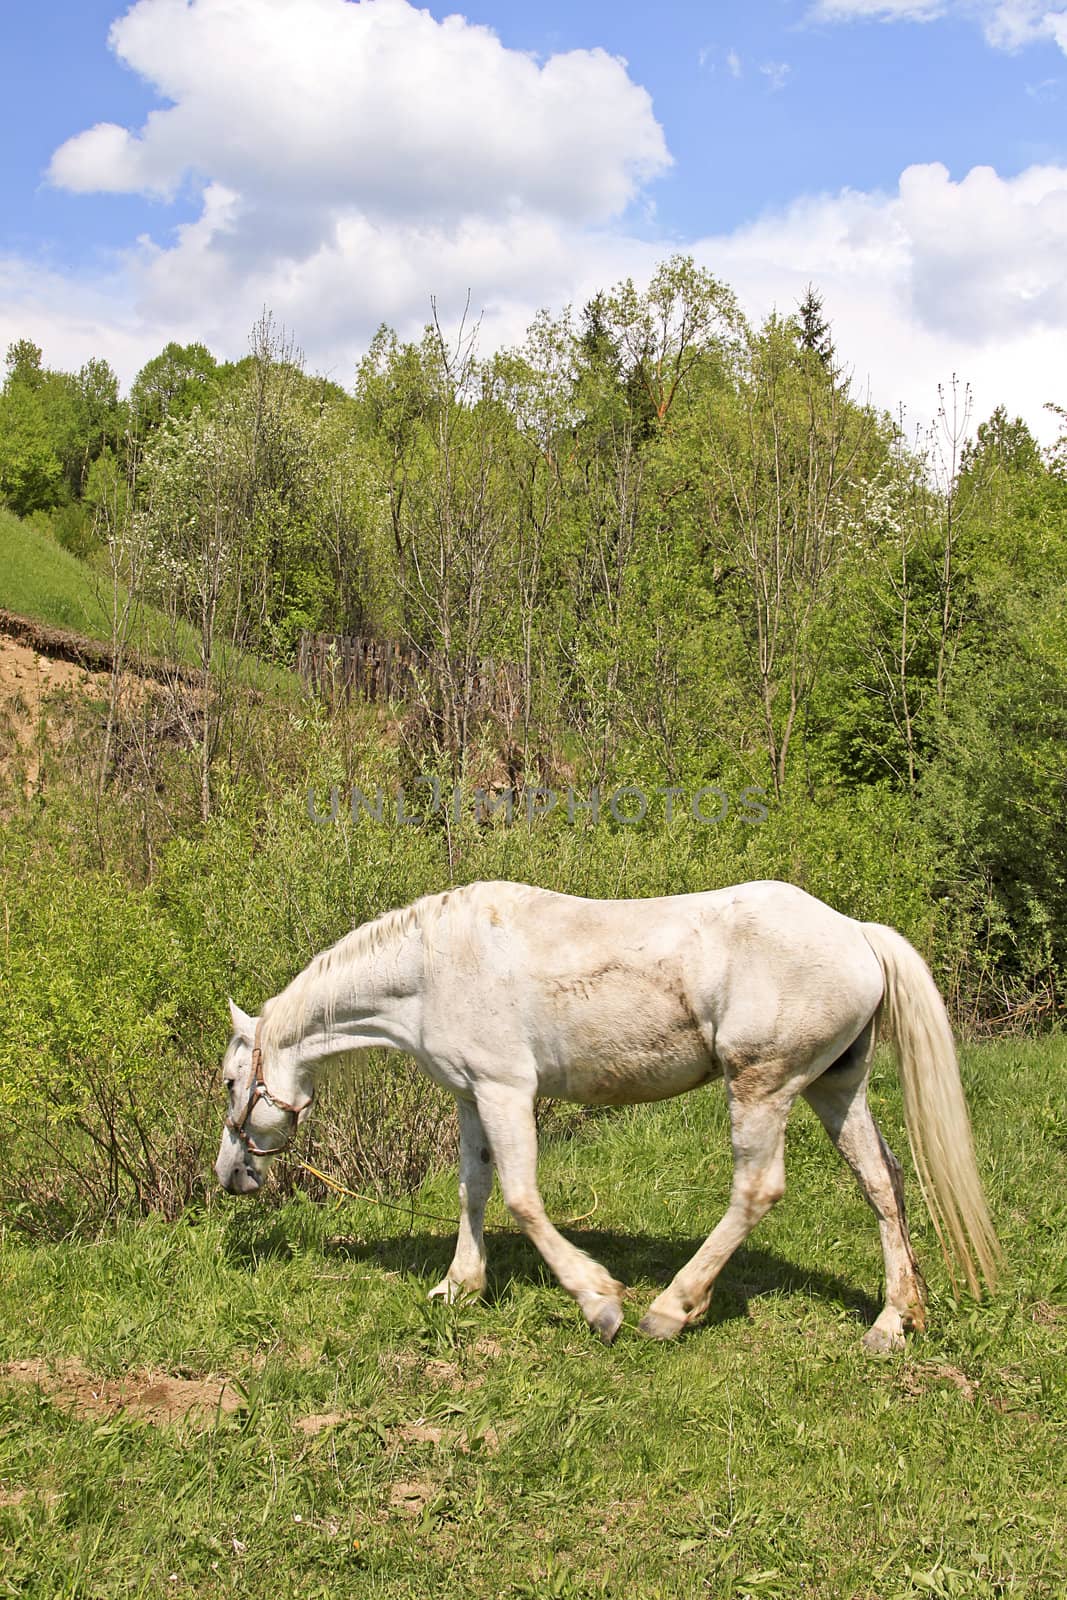 A single white horse on the meadow